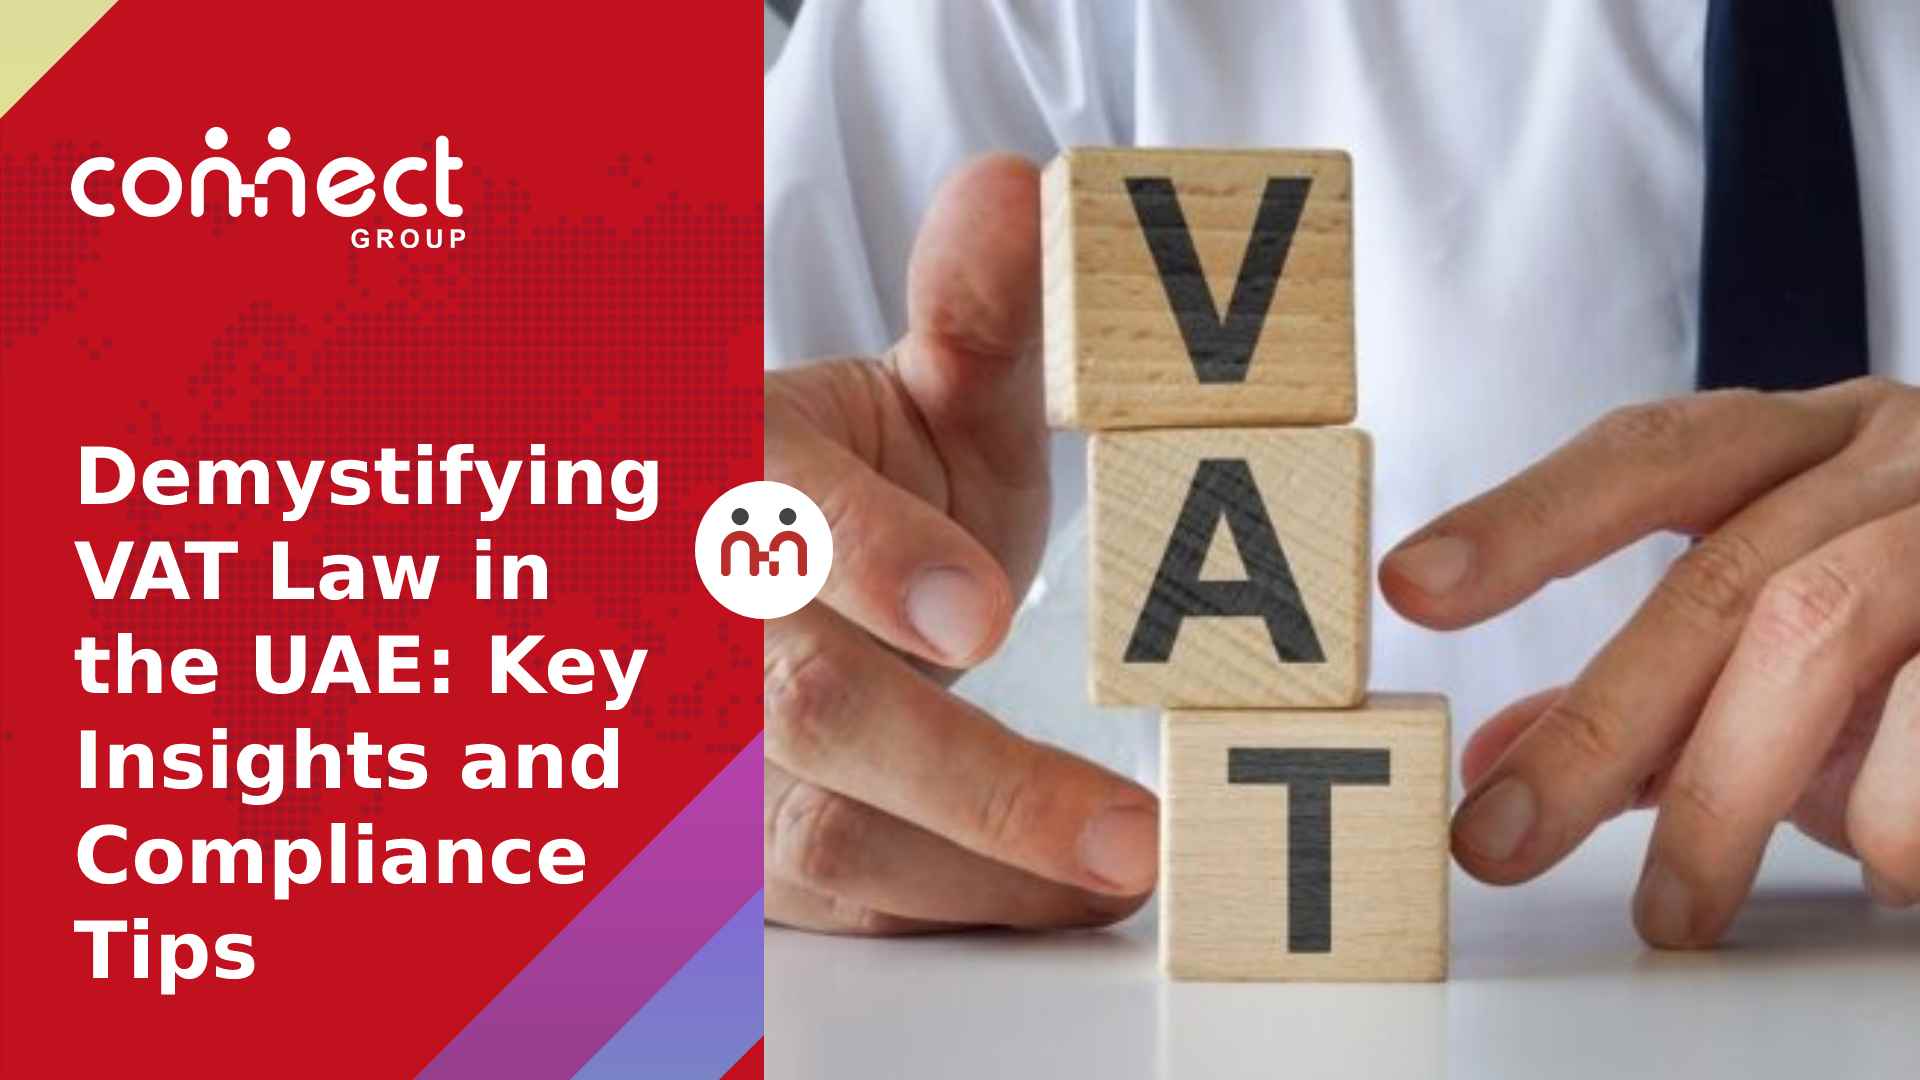 Demystifying VAT Law in the UAE: Key Insights and Compliance Tips